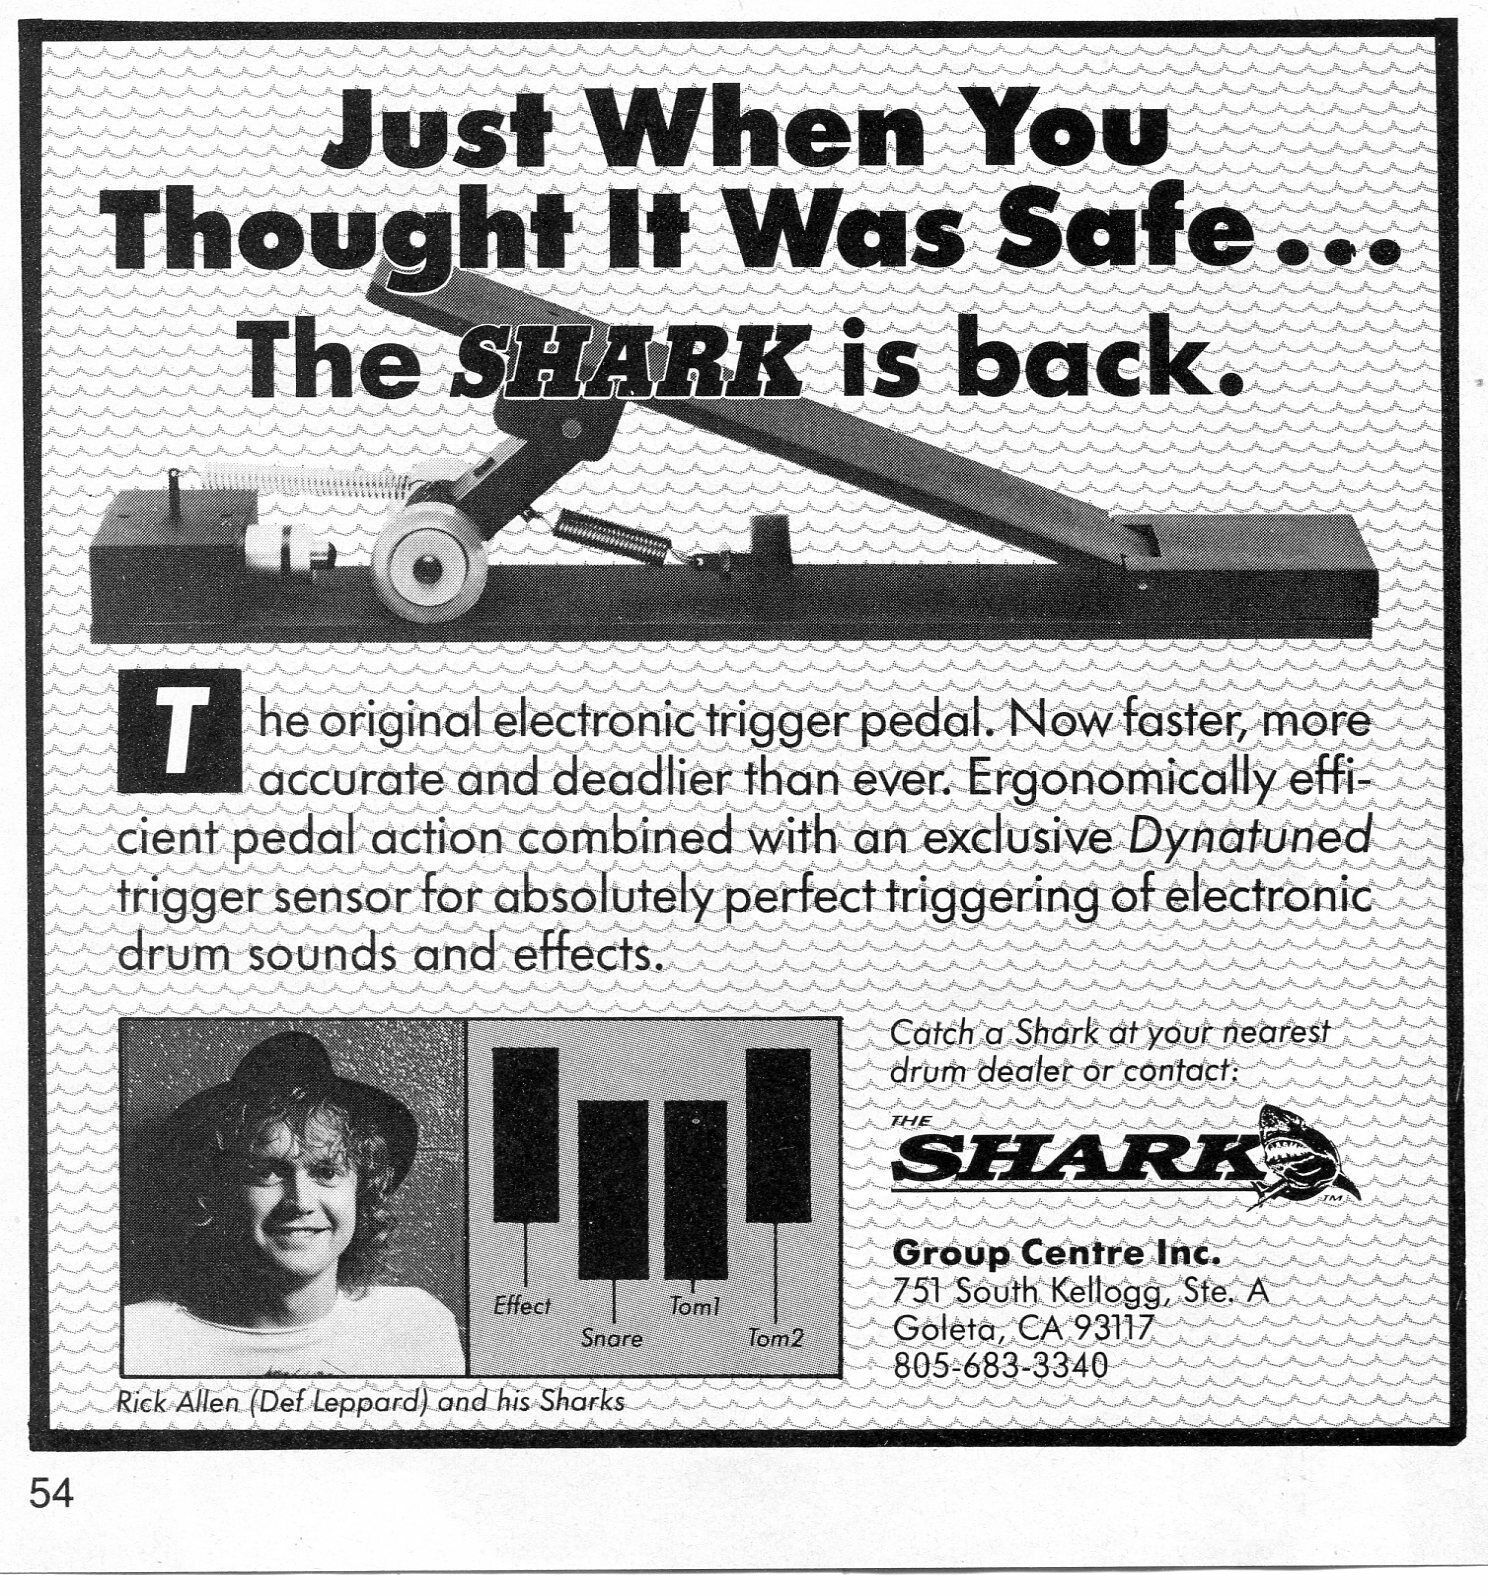 1989 small Print Ad of Shark Electronic Drum Trigger w Rick Allen Def Leppard